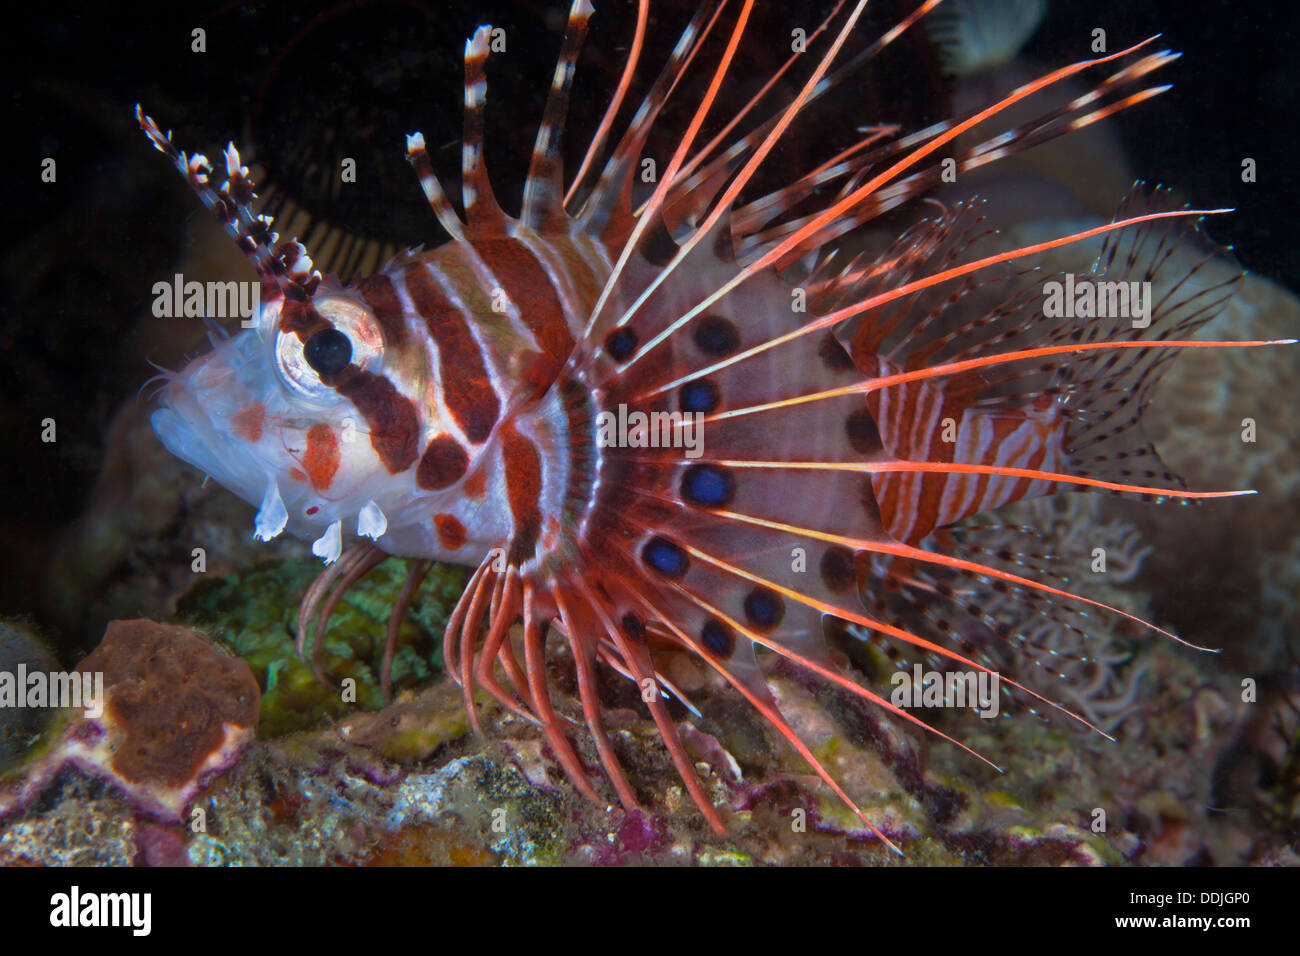 Spotfin lionfish displays detail pattern of pectoral fin in profile image. Puerto Galera, Philippines. Stock Photo